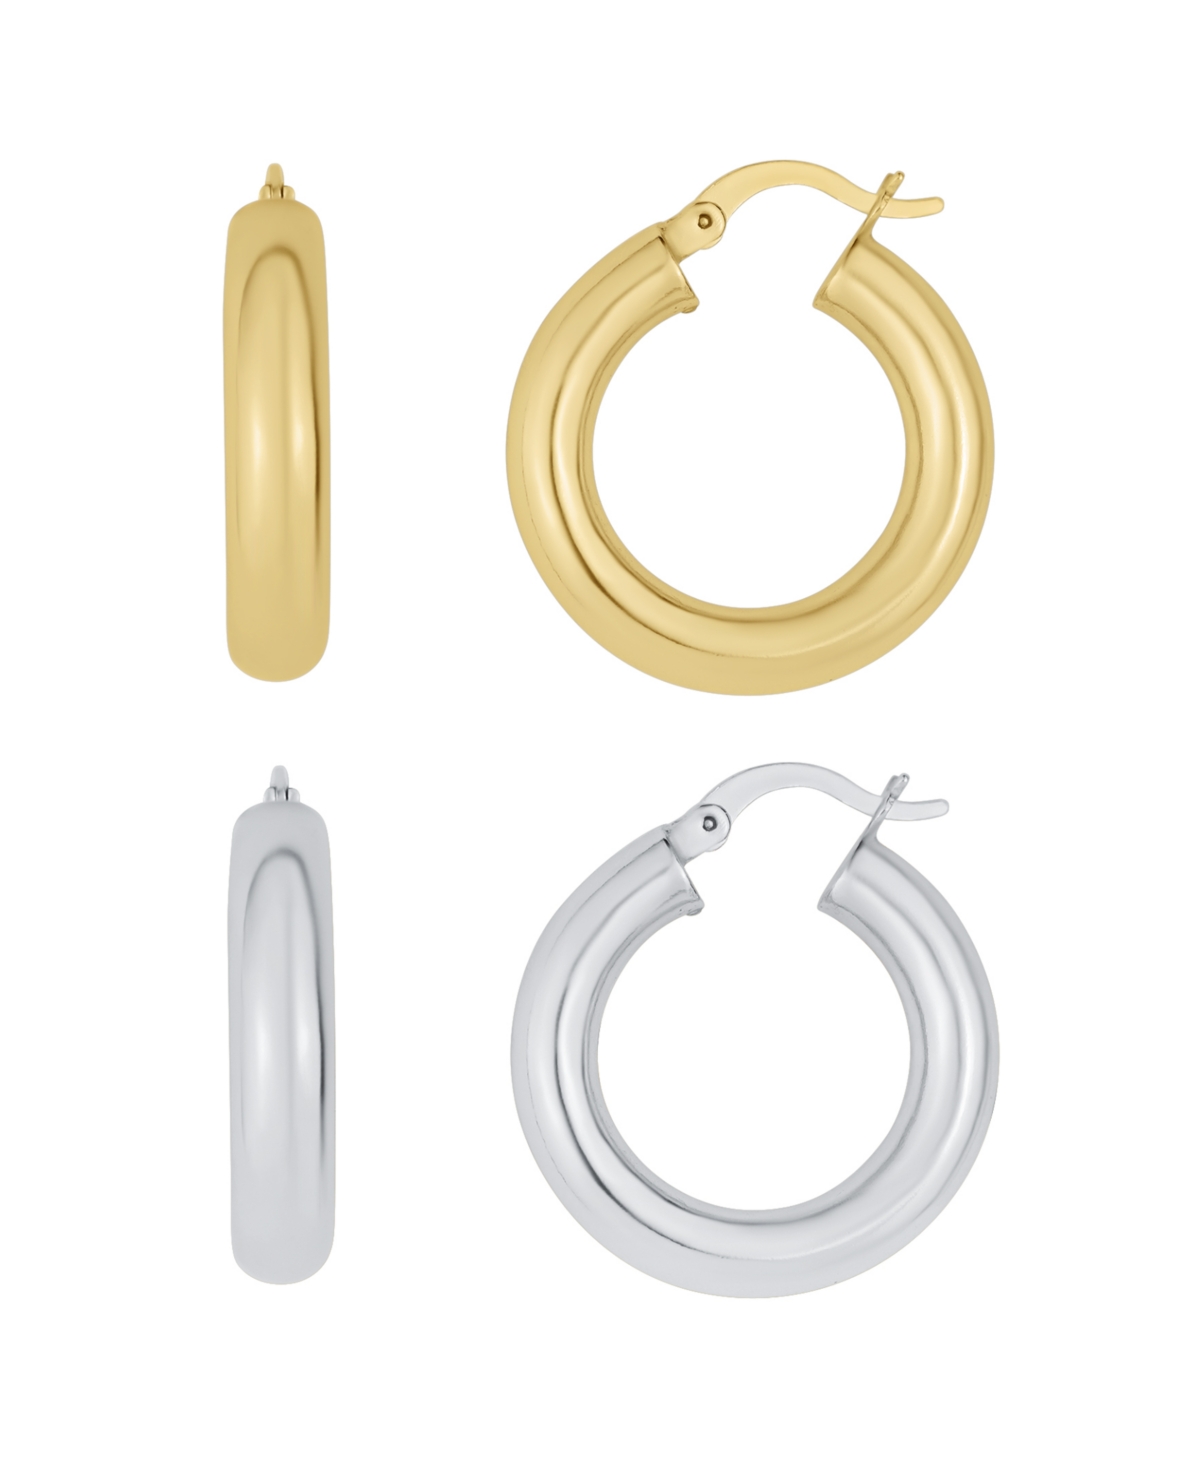 And Now This Silver Plated And 18k Gold Plated Duo Hoop Earring, 4 Pieces In Silver Plated And K Gold Plated Over Bra